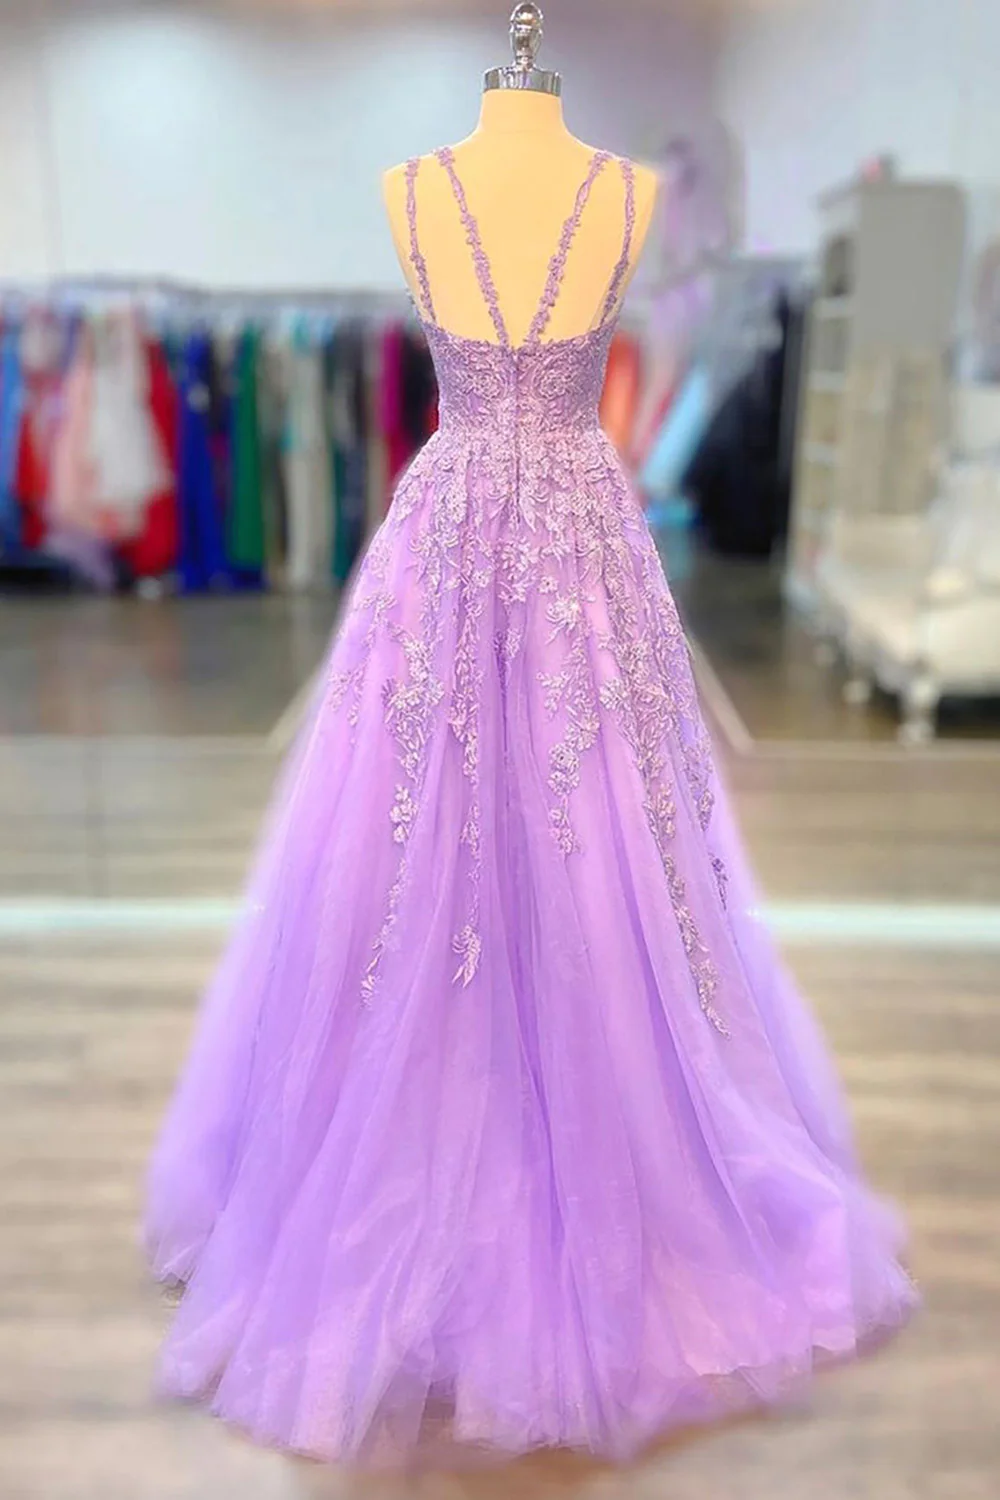 Formall Dresses Short, A-Line Tulle Princess Light Purple Prom Dress With Appliques, Tulle Straps Formal Dress